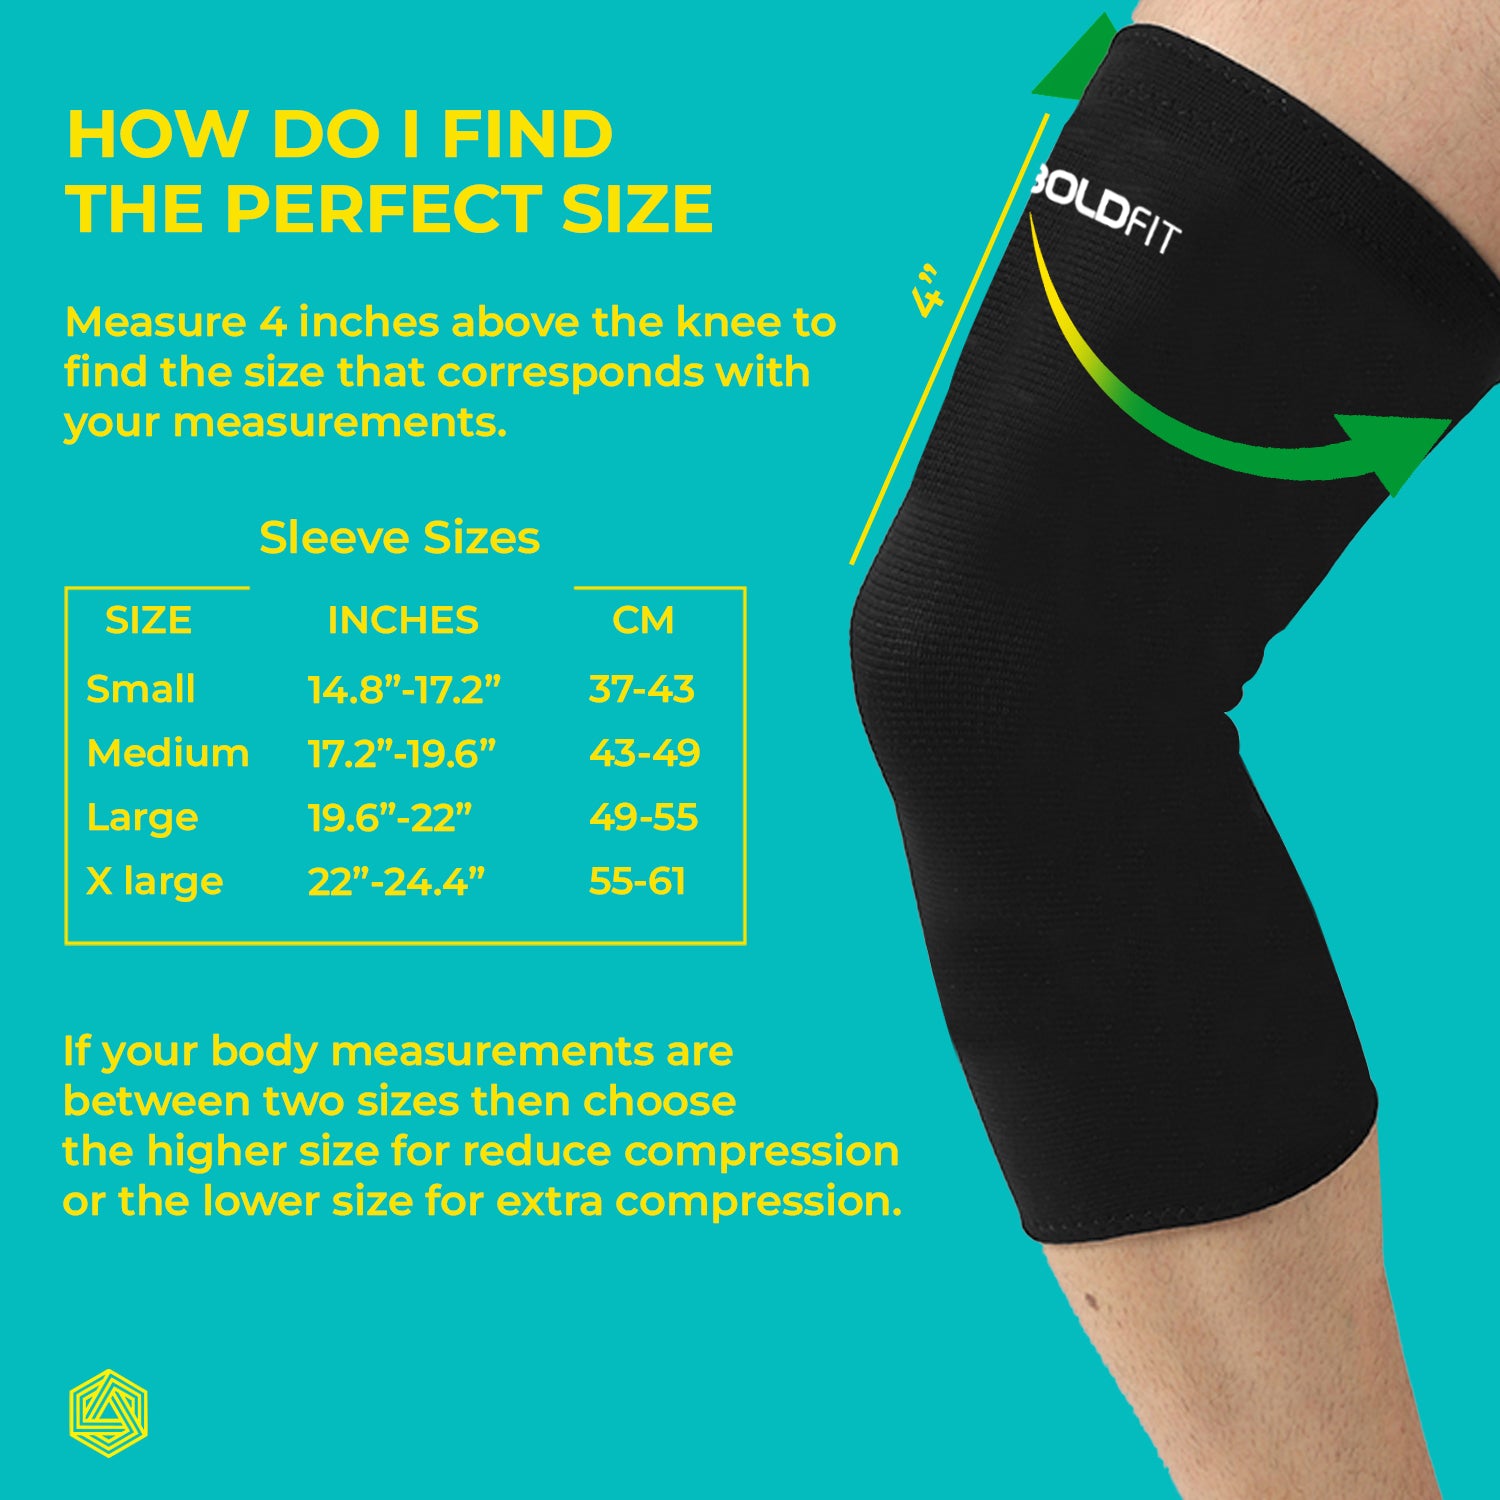 Ortho Knee Support for Pain Relief